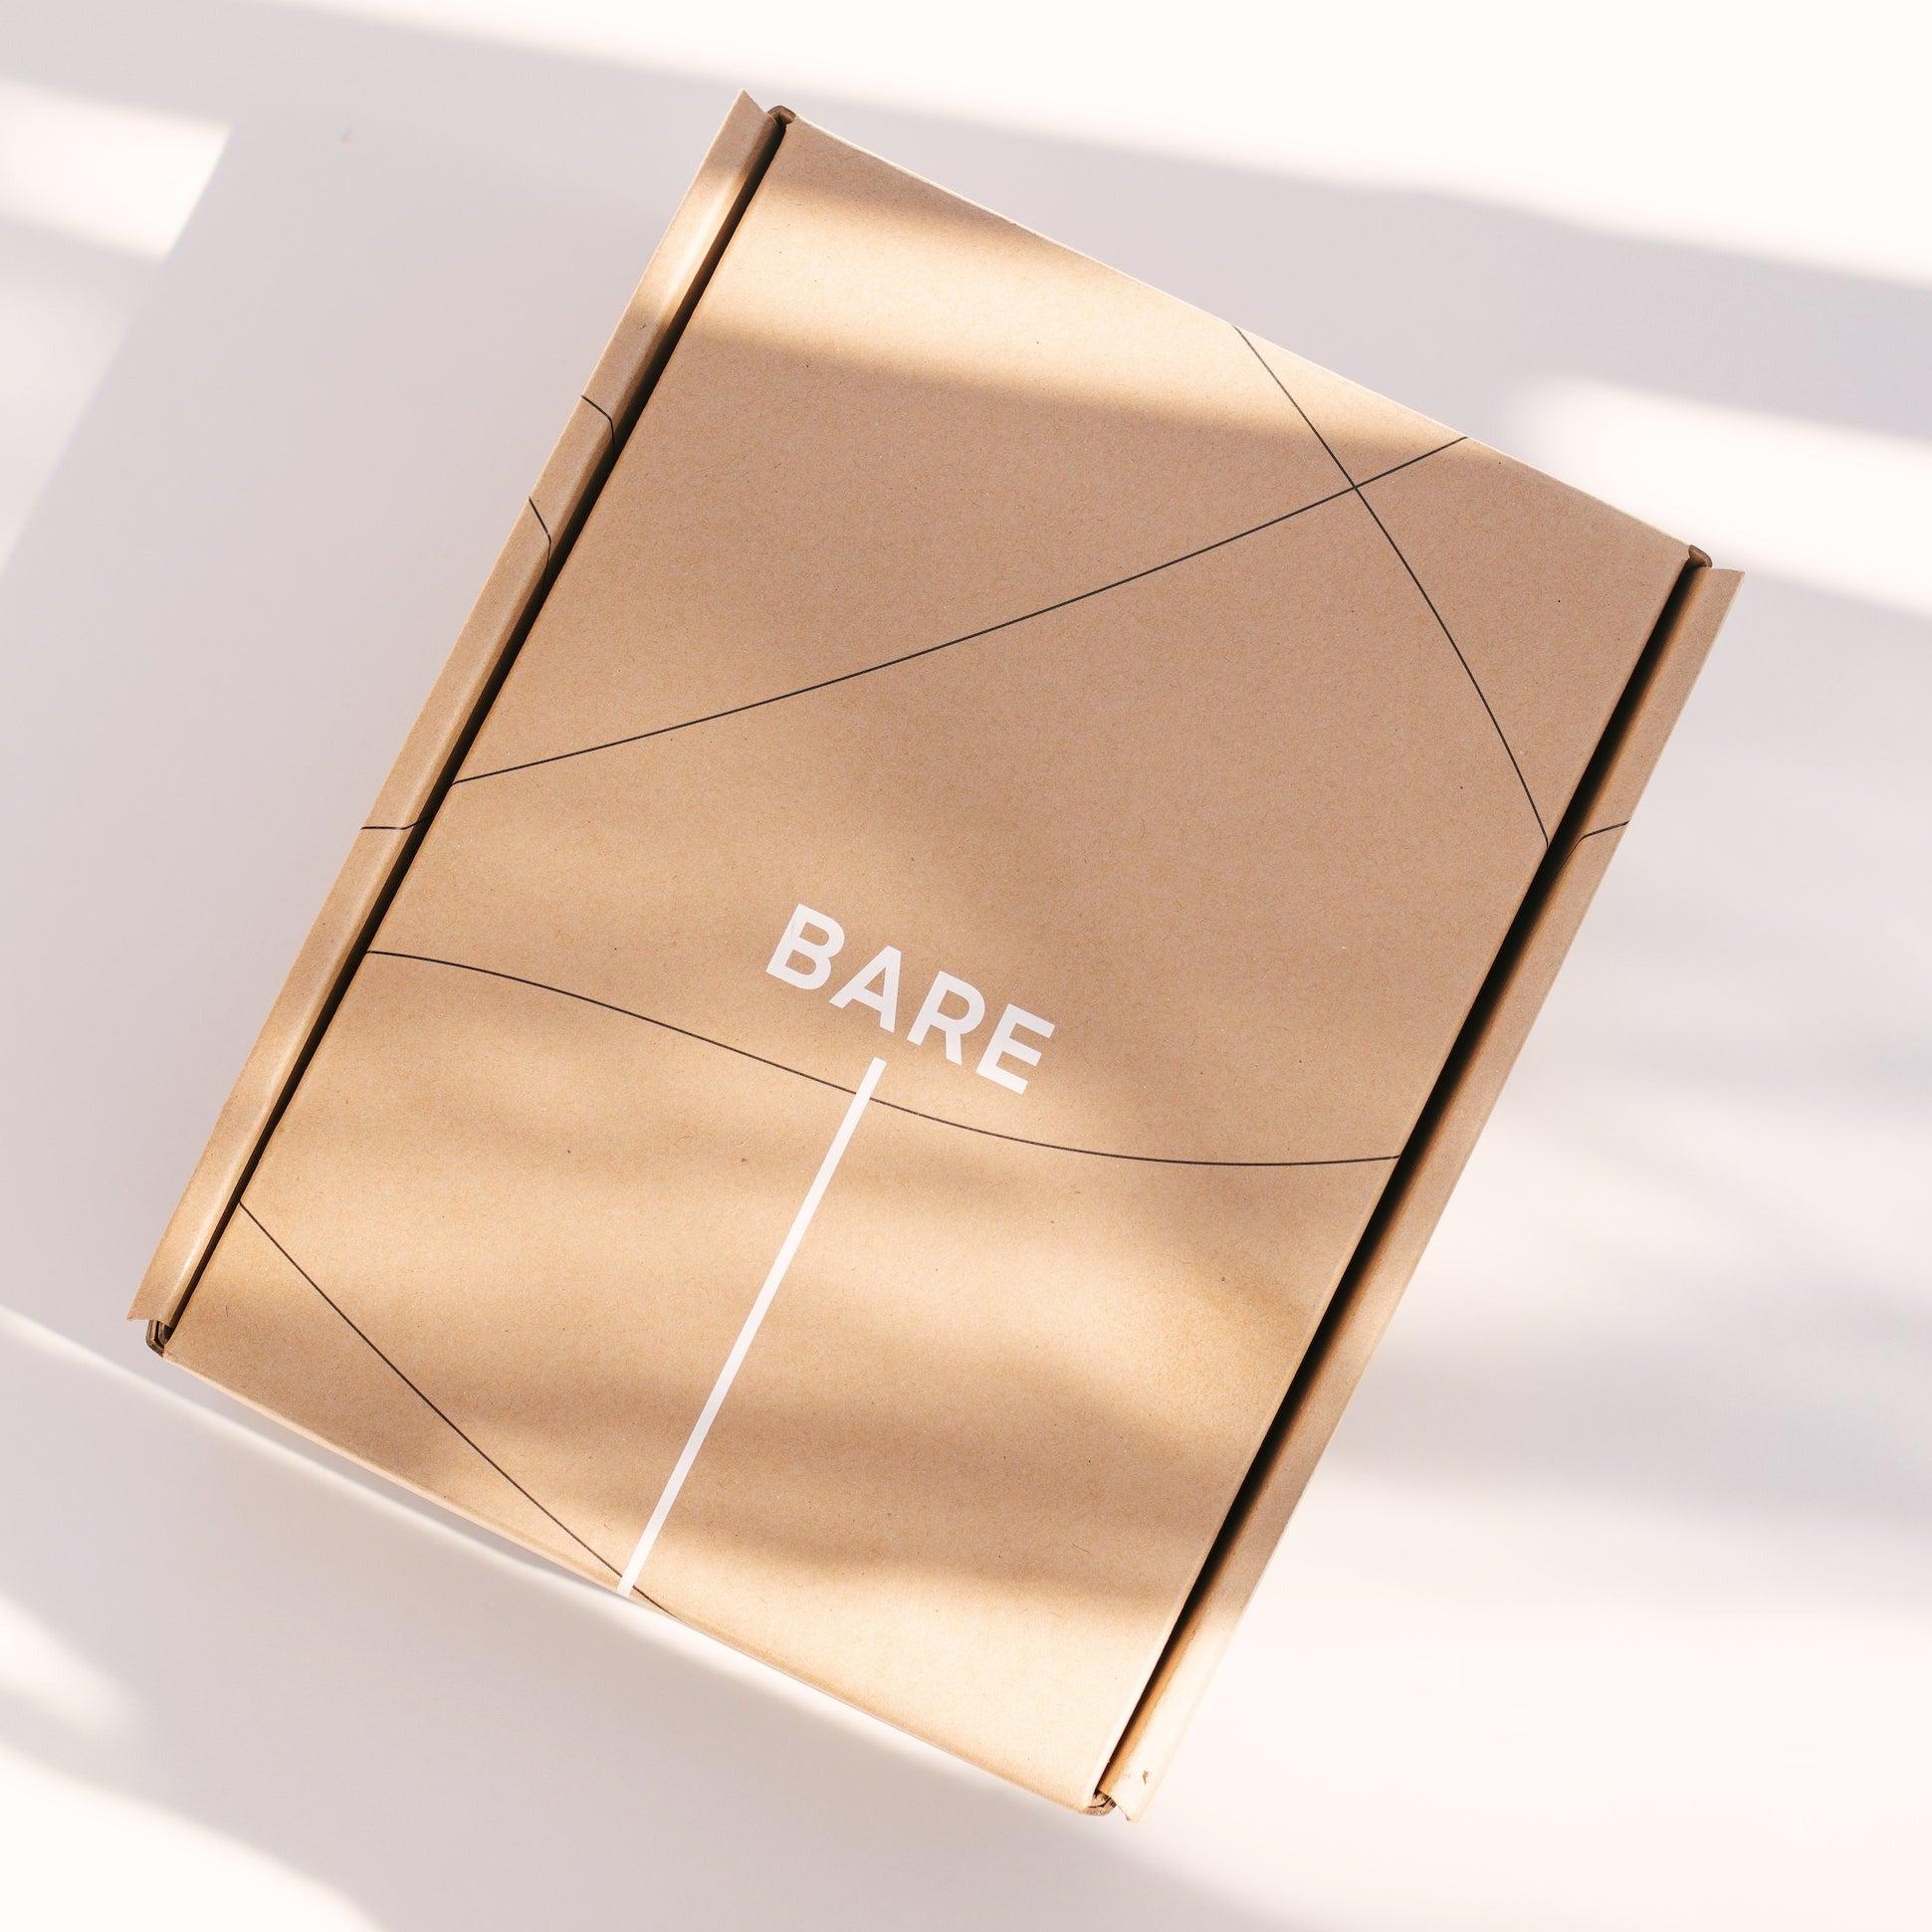 A box with the word Bare on it.